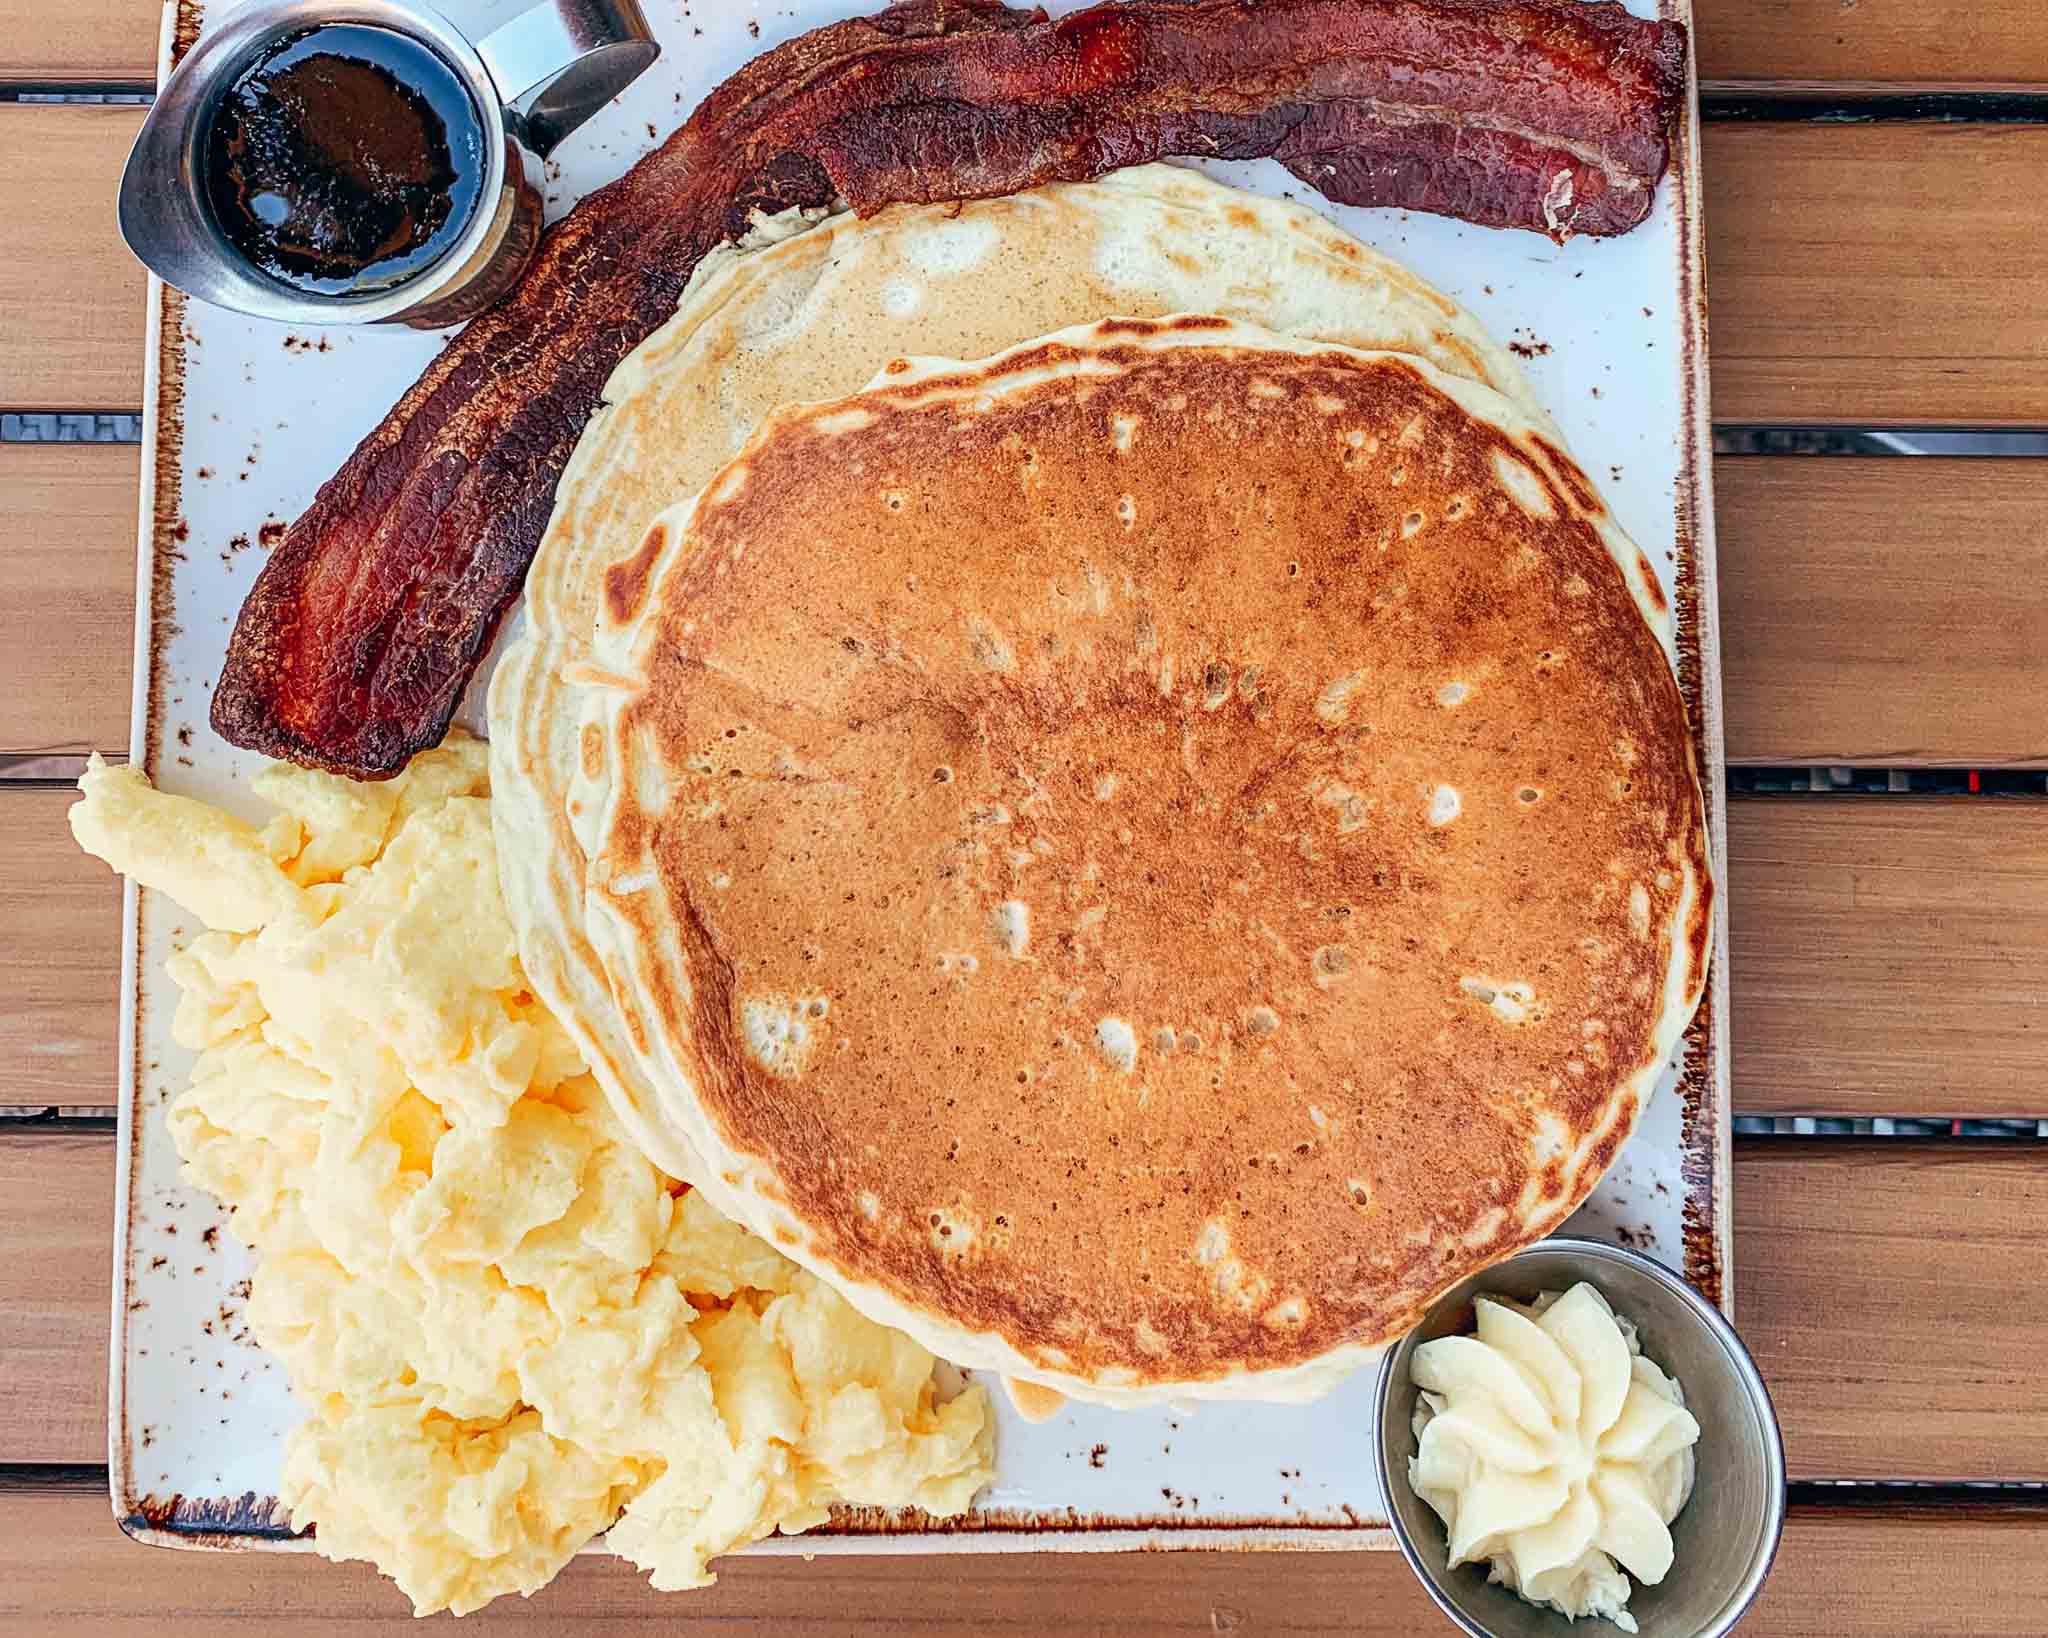 Overhead view of plate with pancakes, scrambled eggs, and a crispy slice of bacon